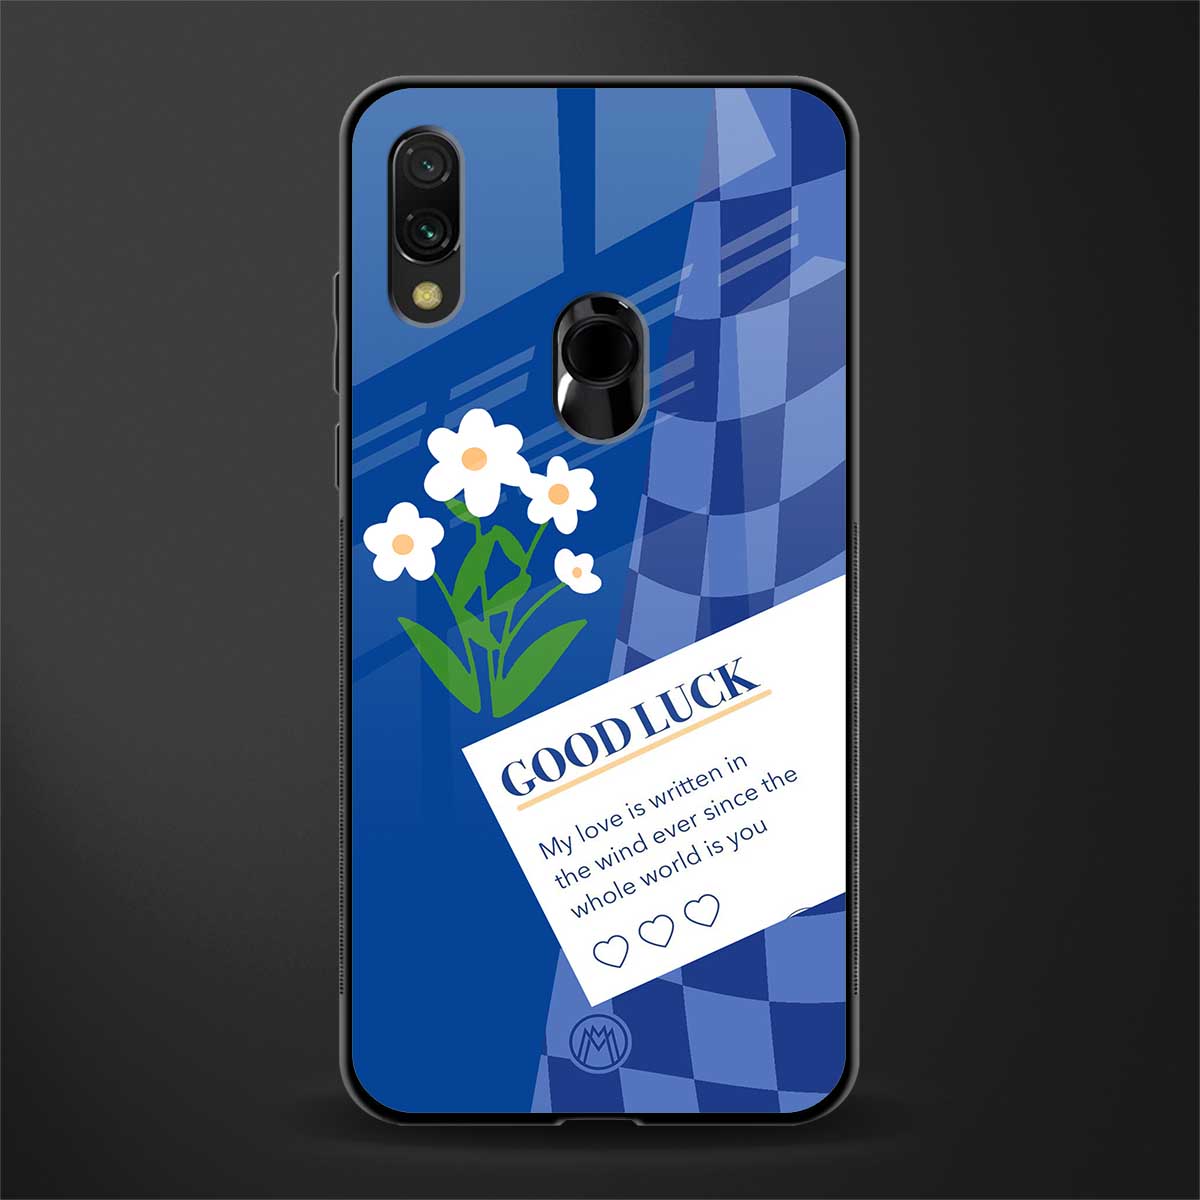 you're my world blue edition glass case for redmi note 7 pro image